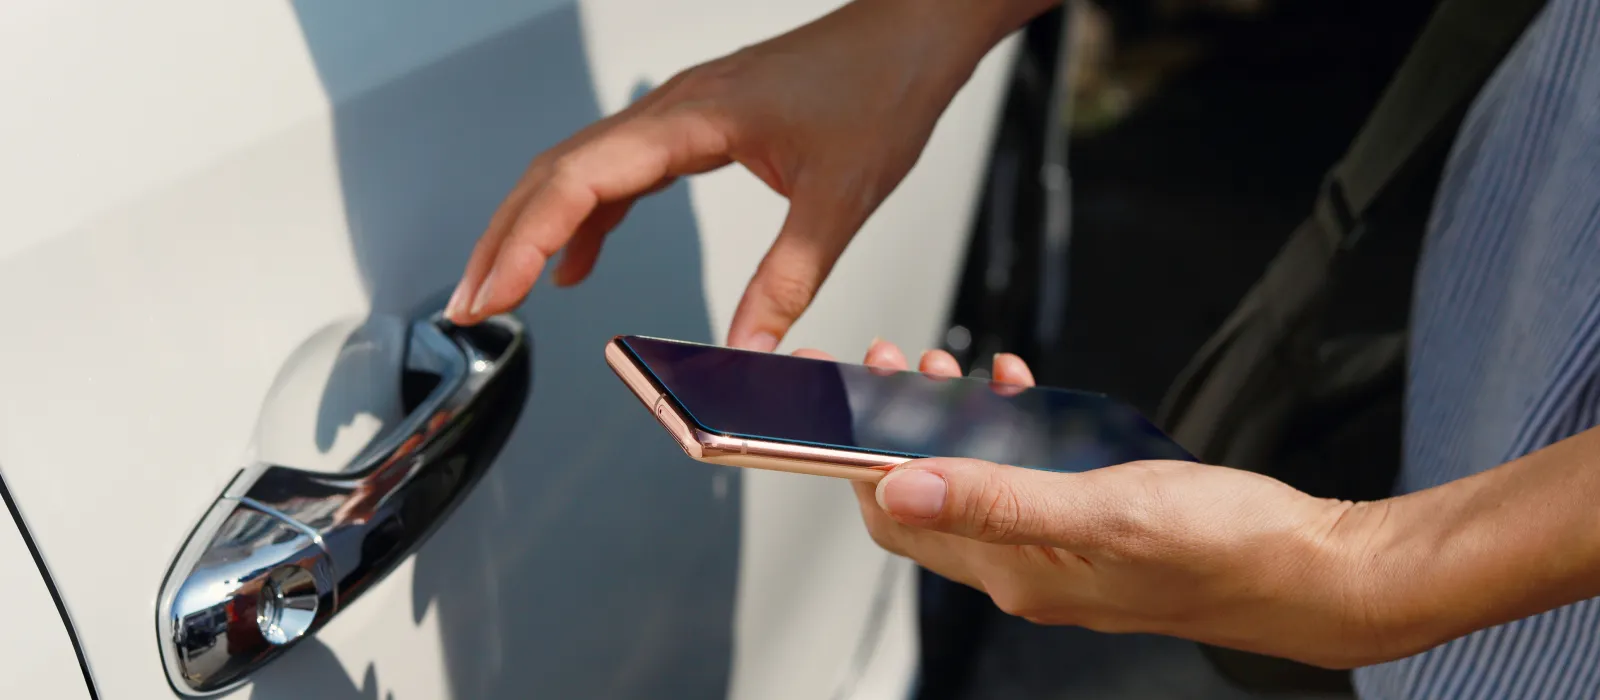 Woman with smartphone opens a car door with NFC technology